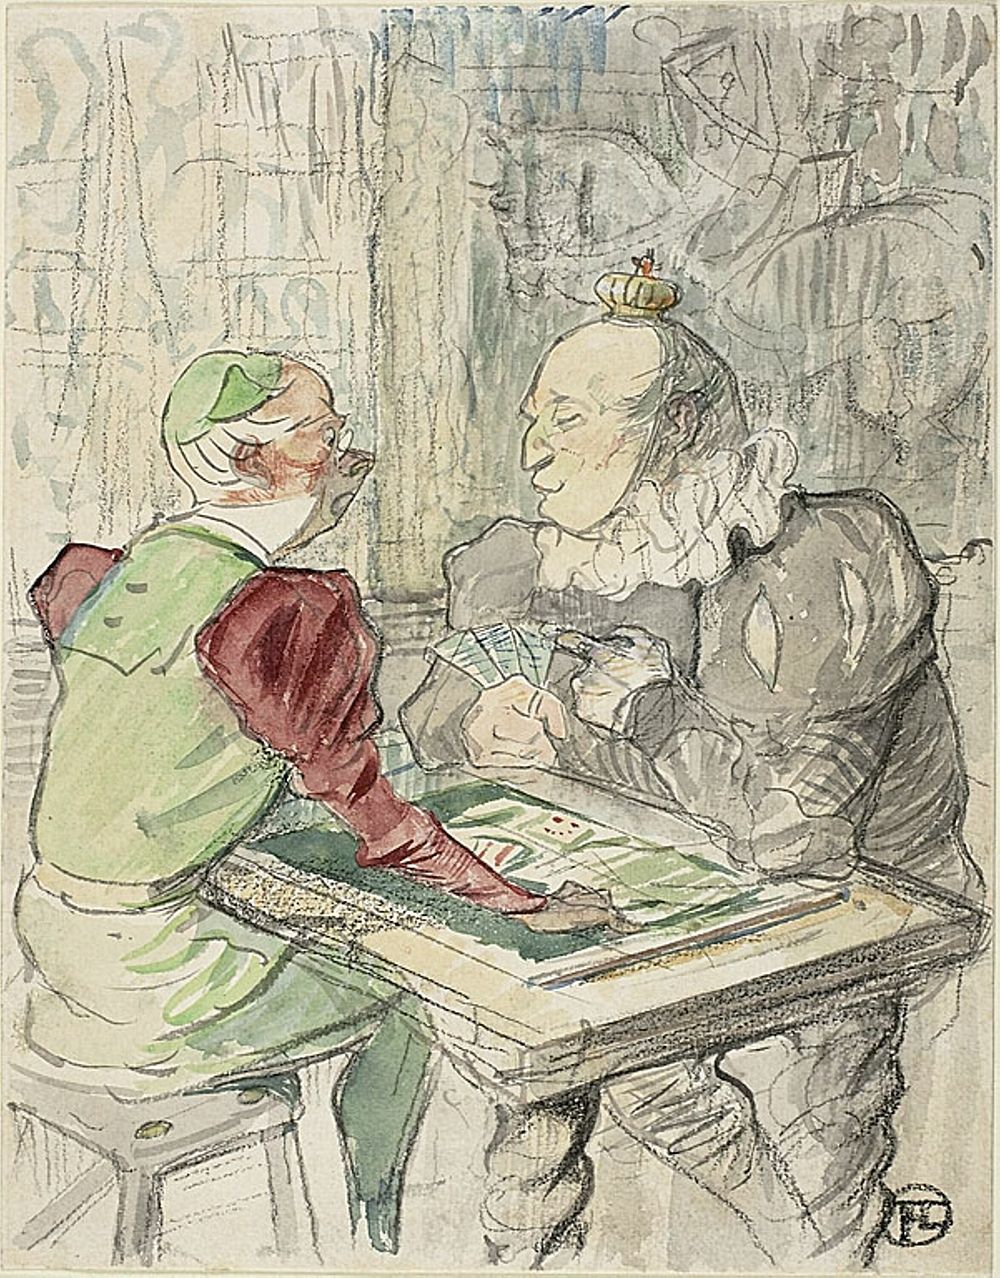 The King's Card Game, copy by Imitator of Henri de Toulouse-Lautrec